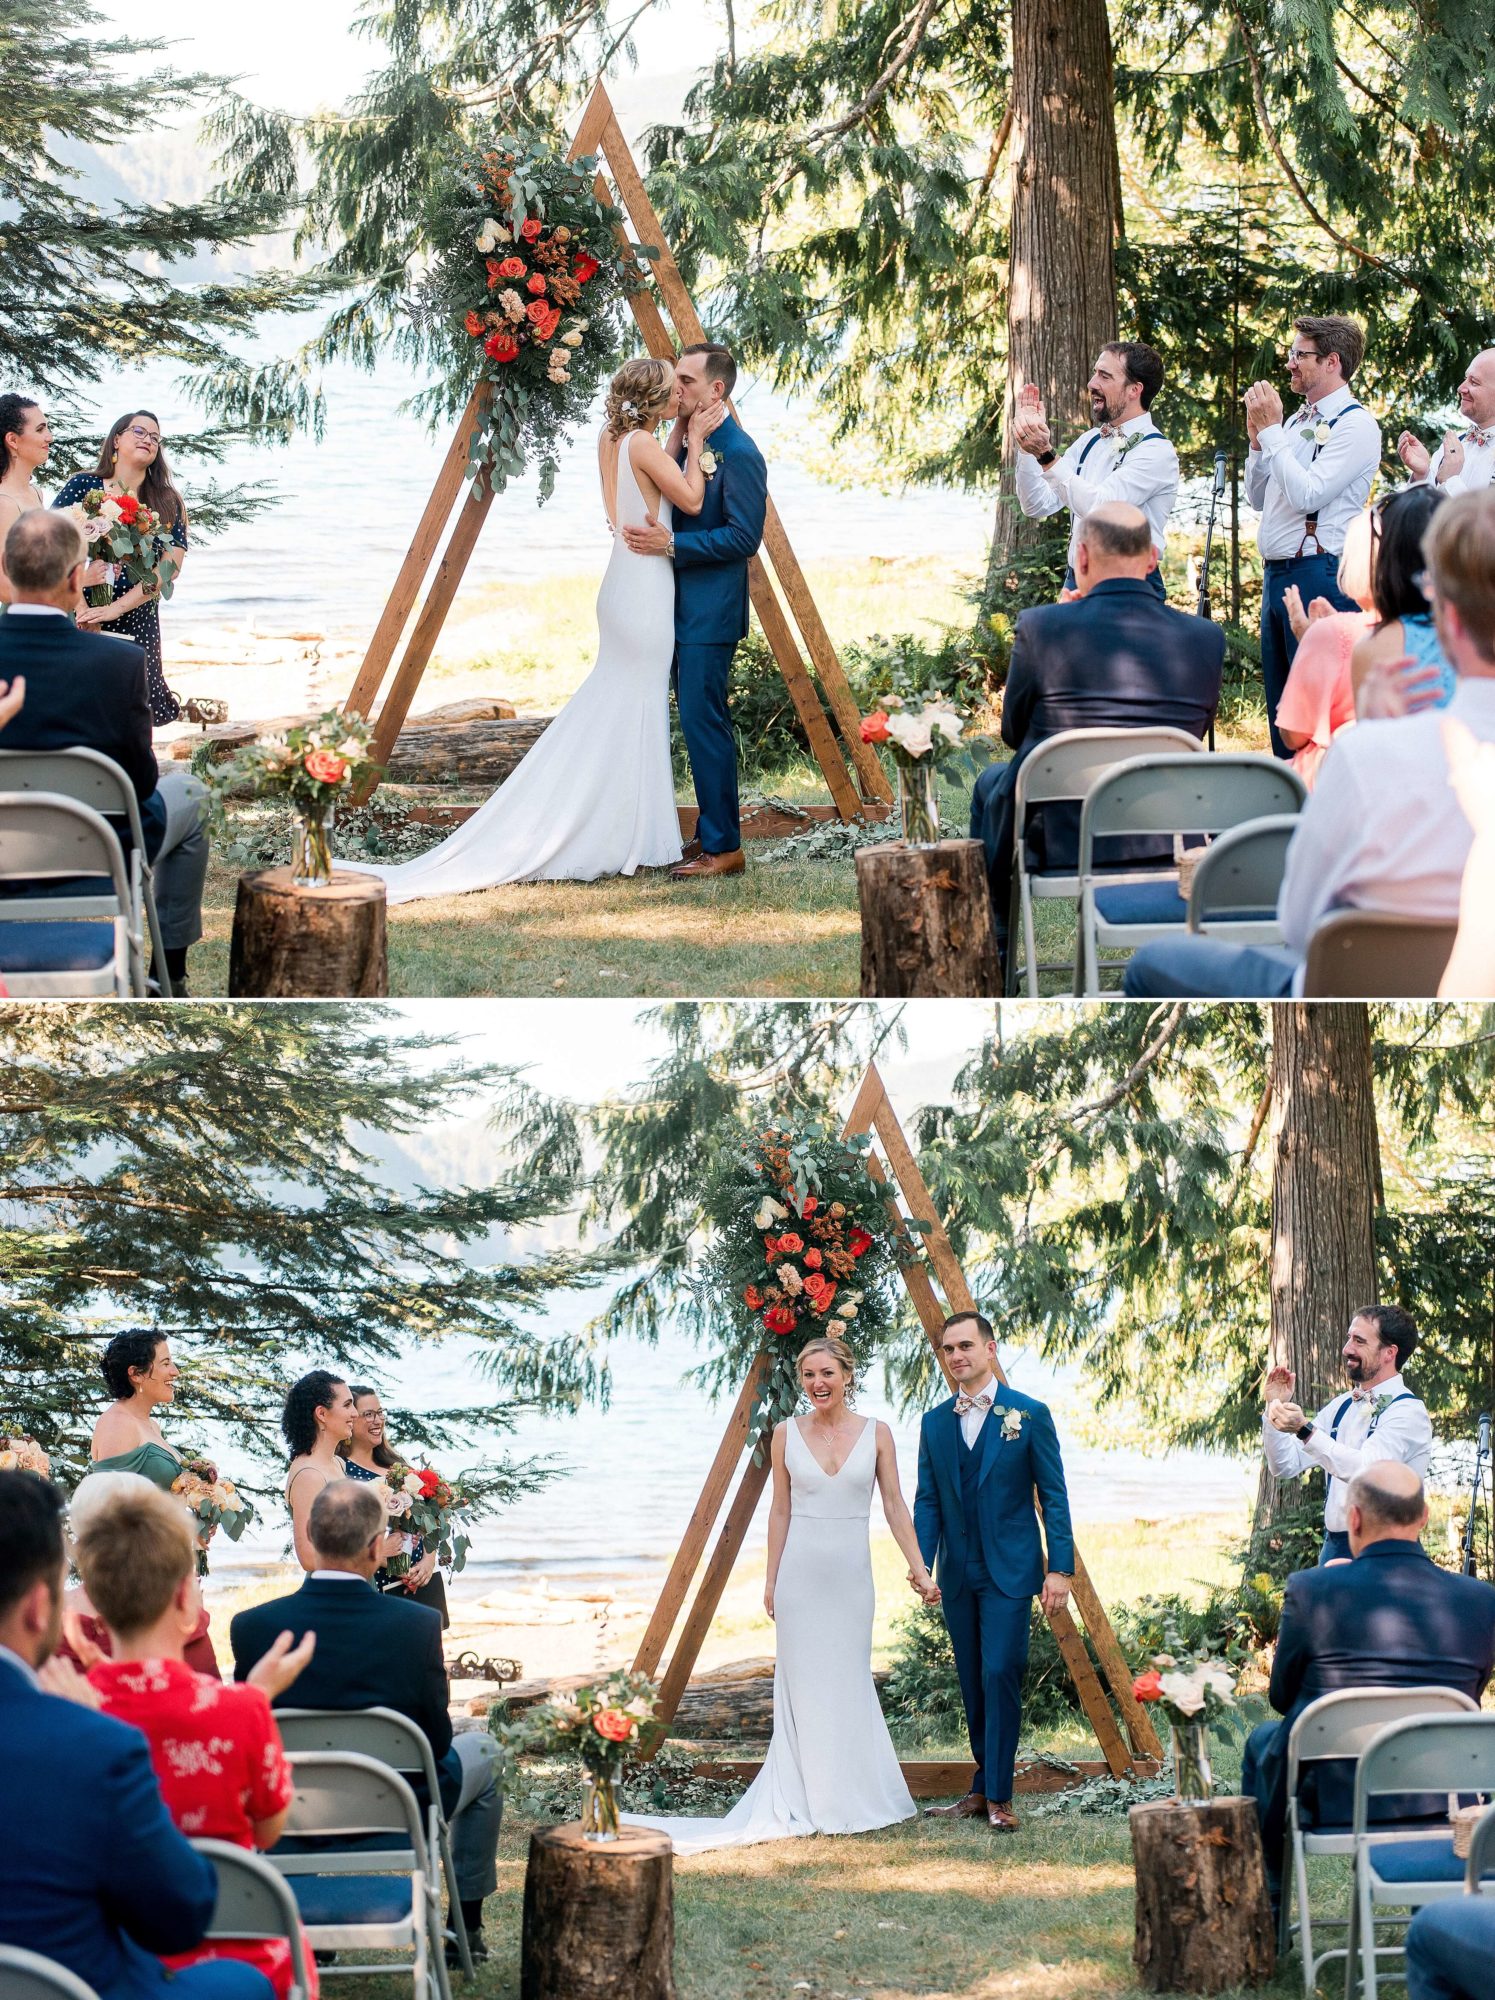 Outdoor wedding ceremony and first kiss at a NatureBridge Wedding